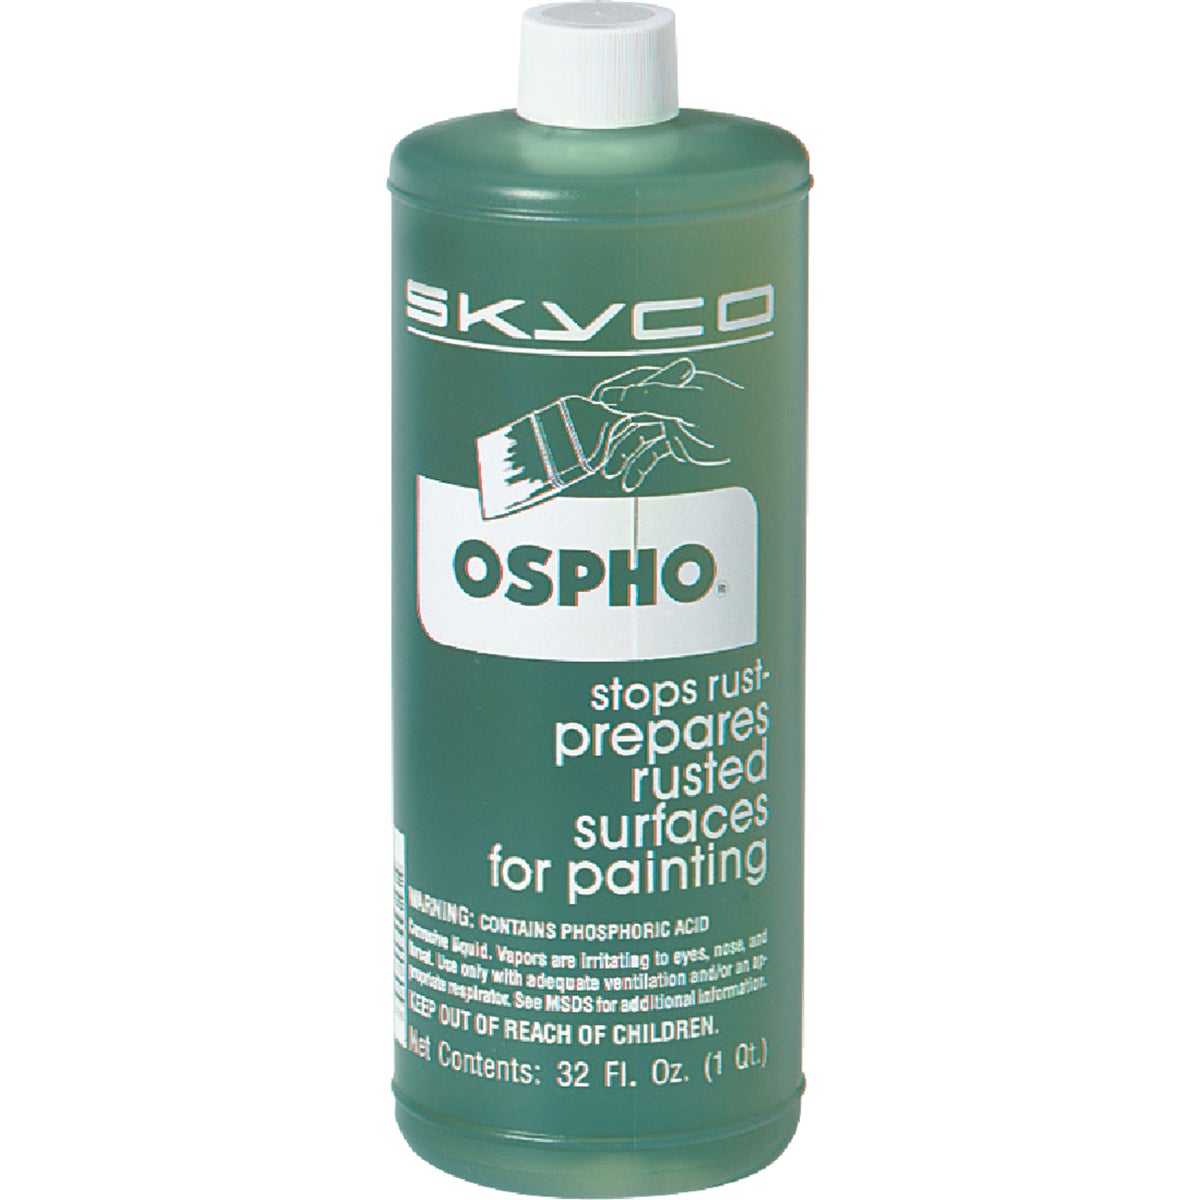 Item 784252, OSPHO is a rust-inhibiting coating not a paint.